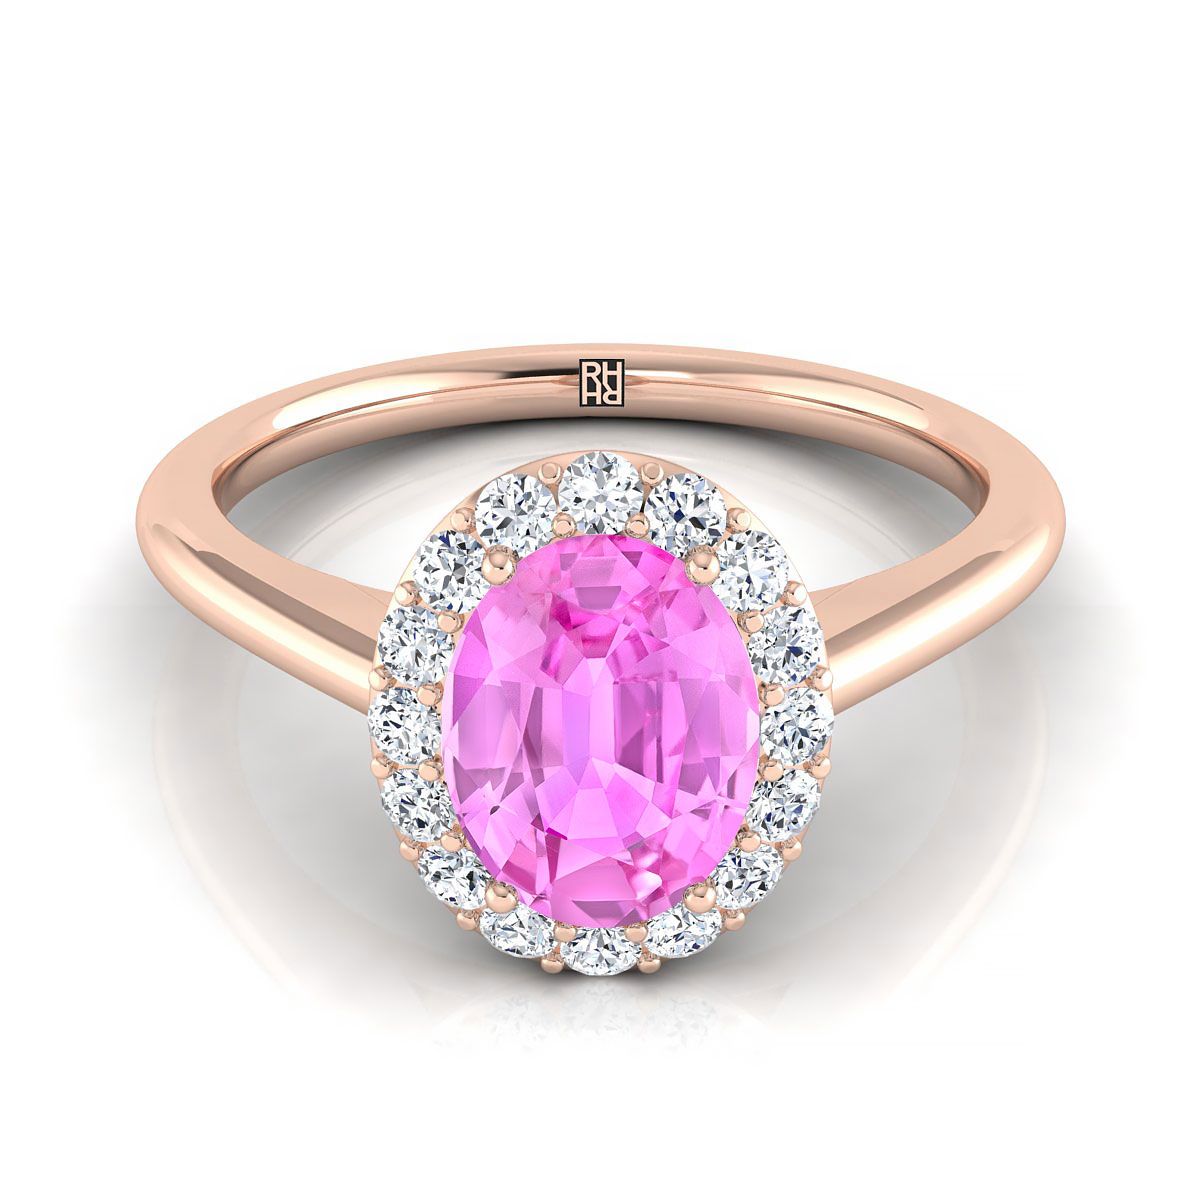 14K Rose Gold Oval Pink Sapphire Shared Prong Diamond Halo Engagement Ring -1/5ctw